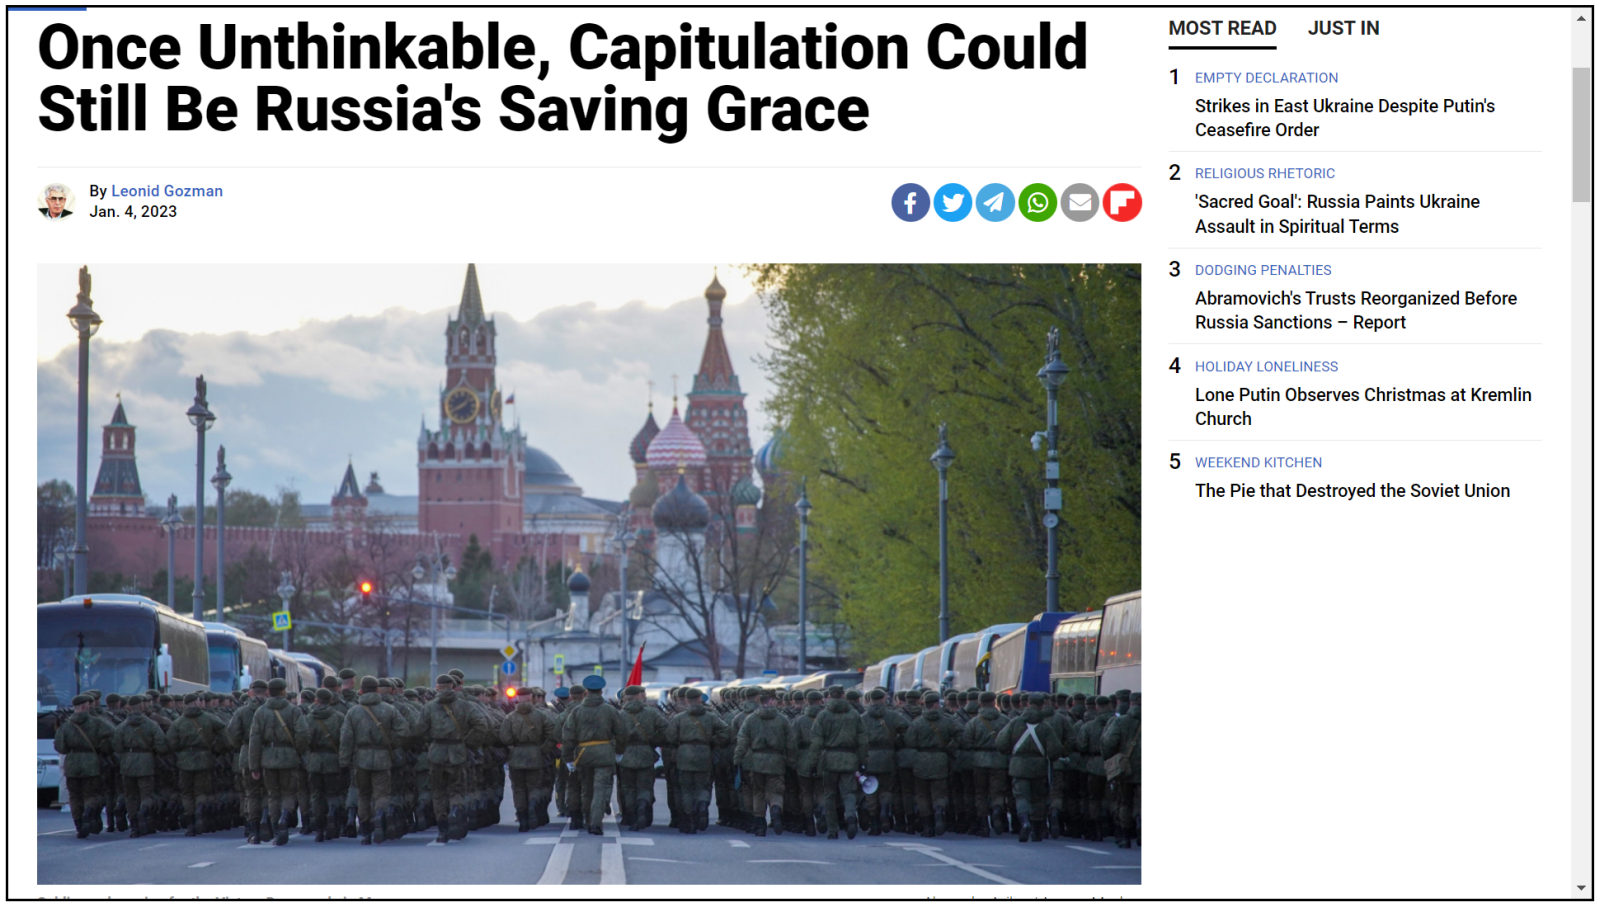 Russia: once unthinkable, capitulation is now a possibility